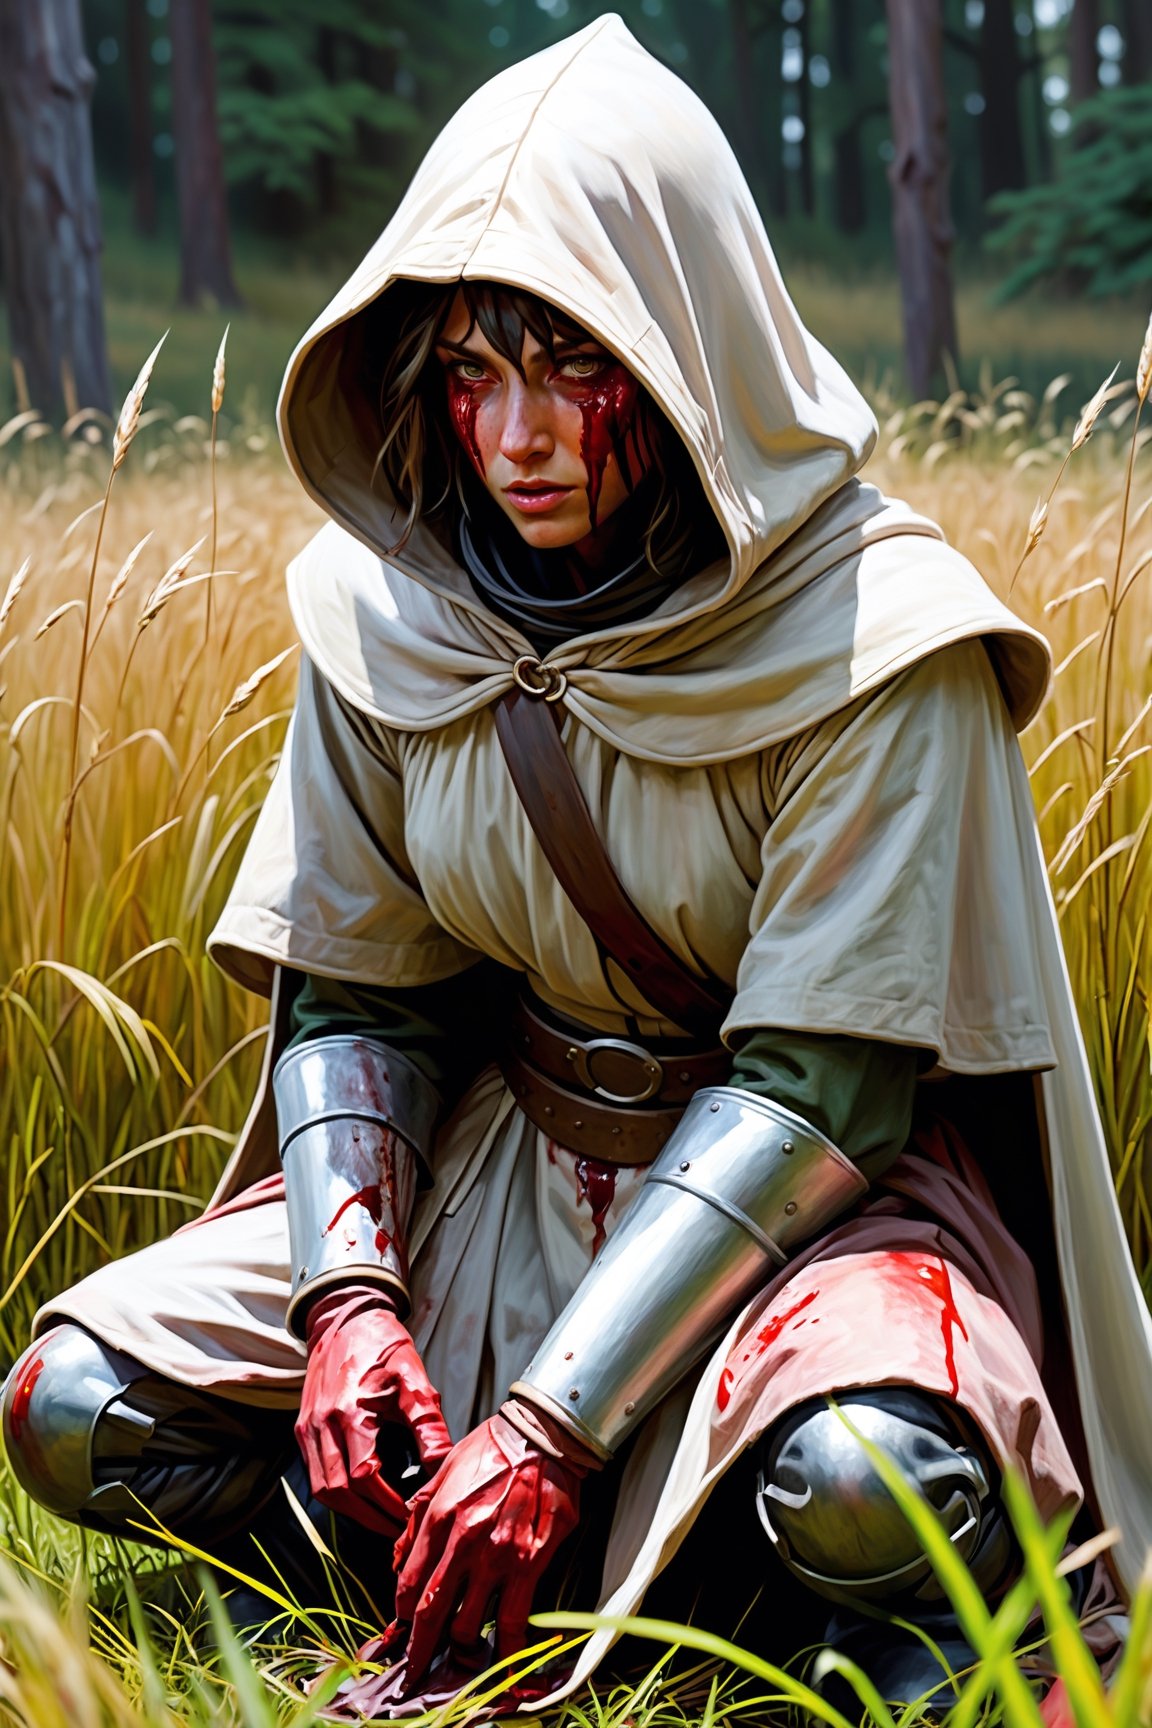 vast tall grass field with figure kneeling bloody with (hood, faceplate, helmet) figure ,(art by James Gurney), eerie, thick paint, close_up,(art by sargent), starved, robes, , pale, (bloody), ,newhorrorfantasy_style, Elden_ring